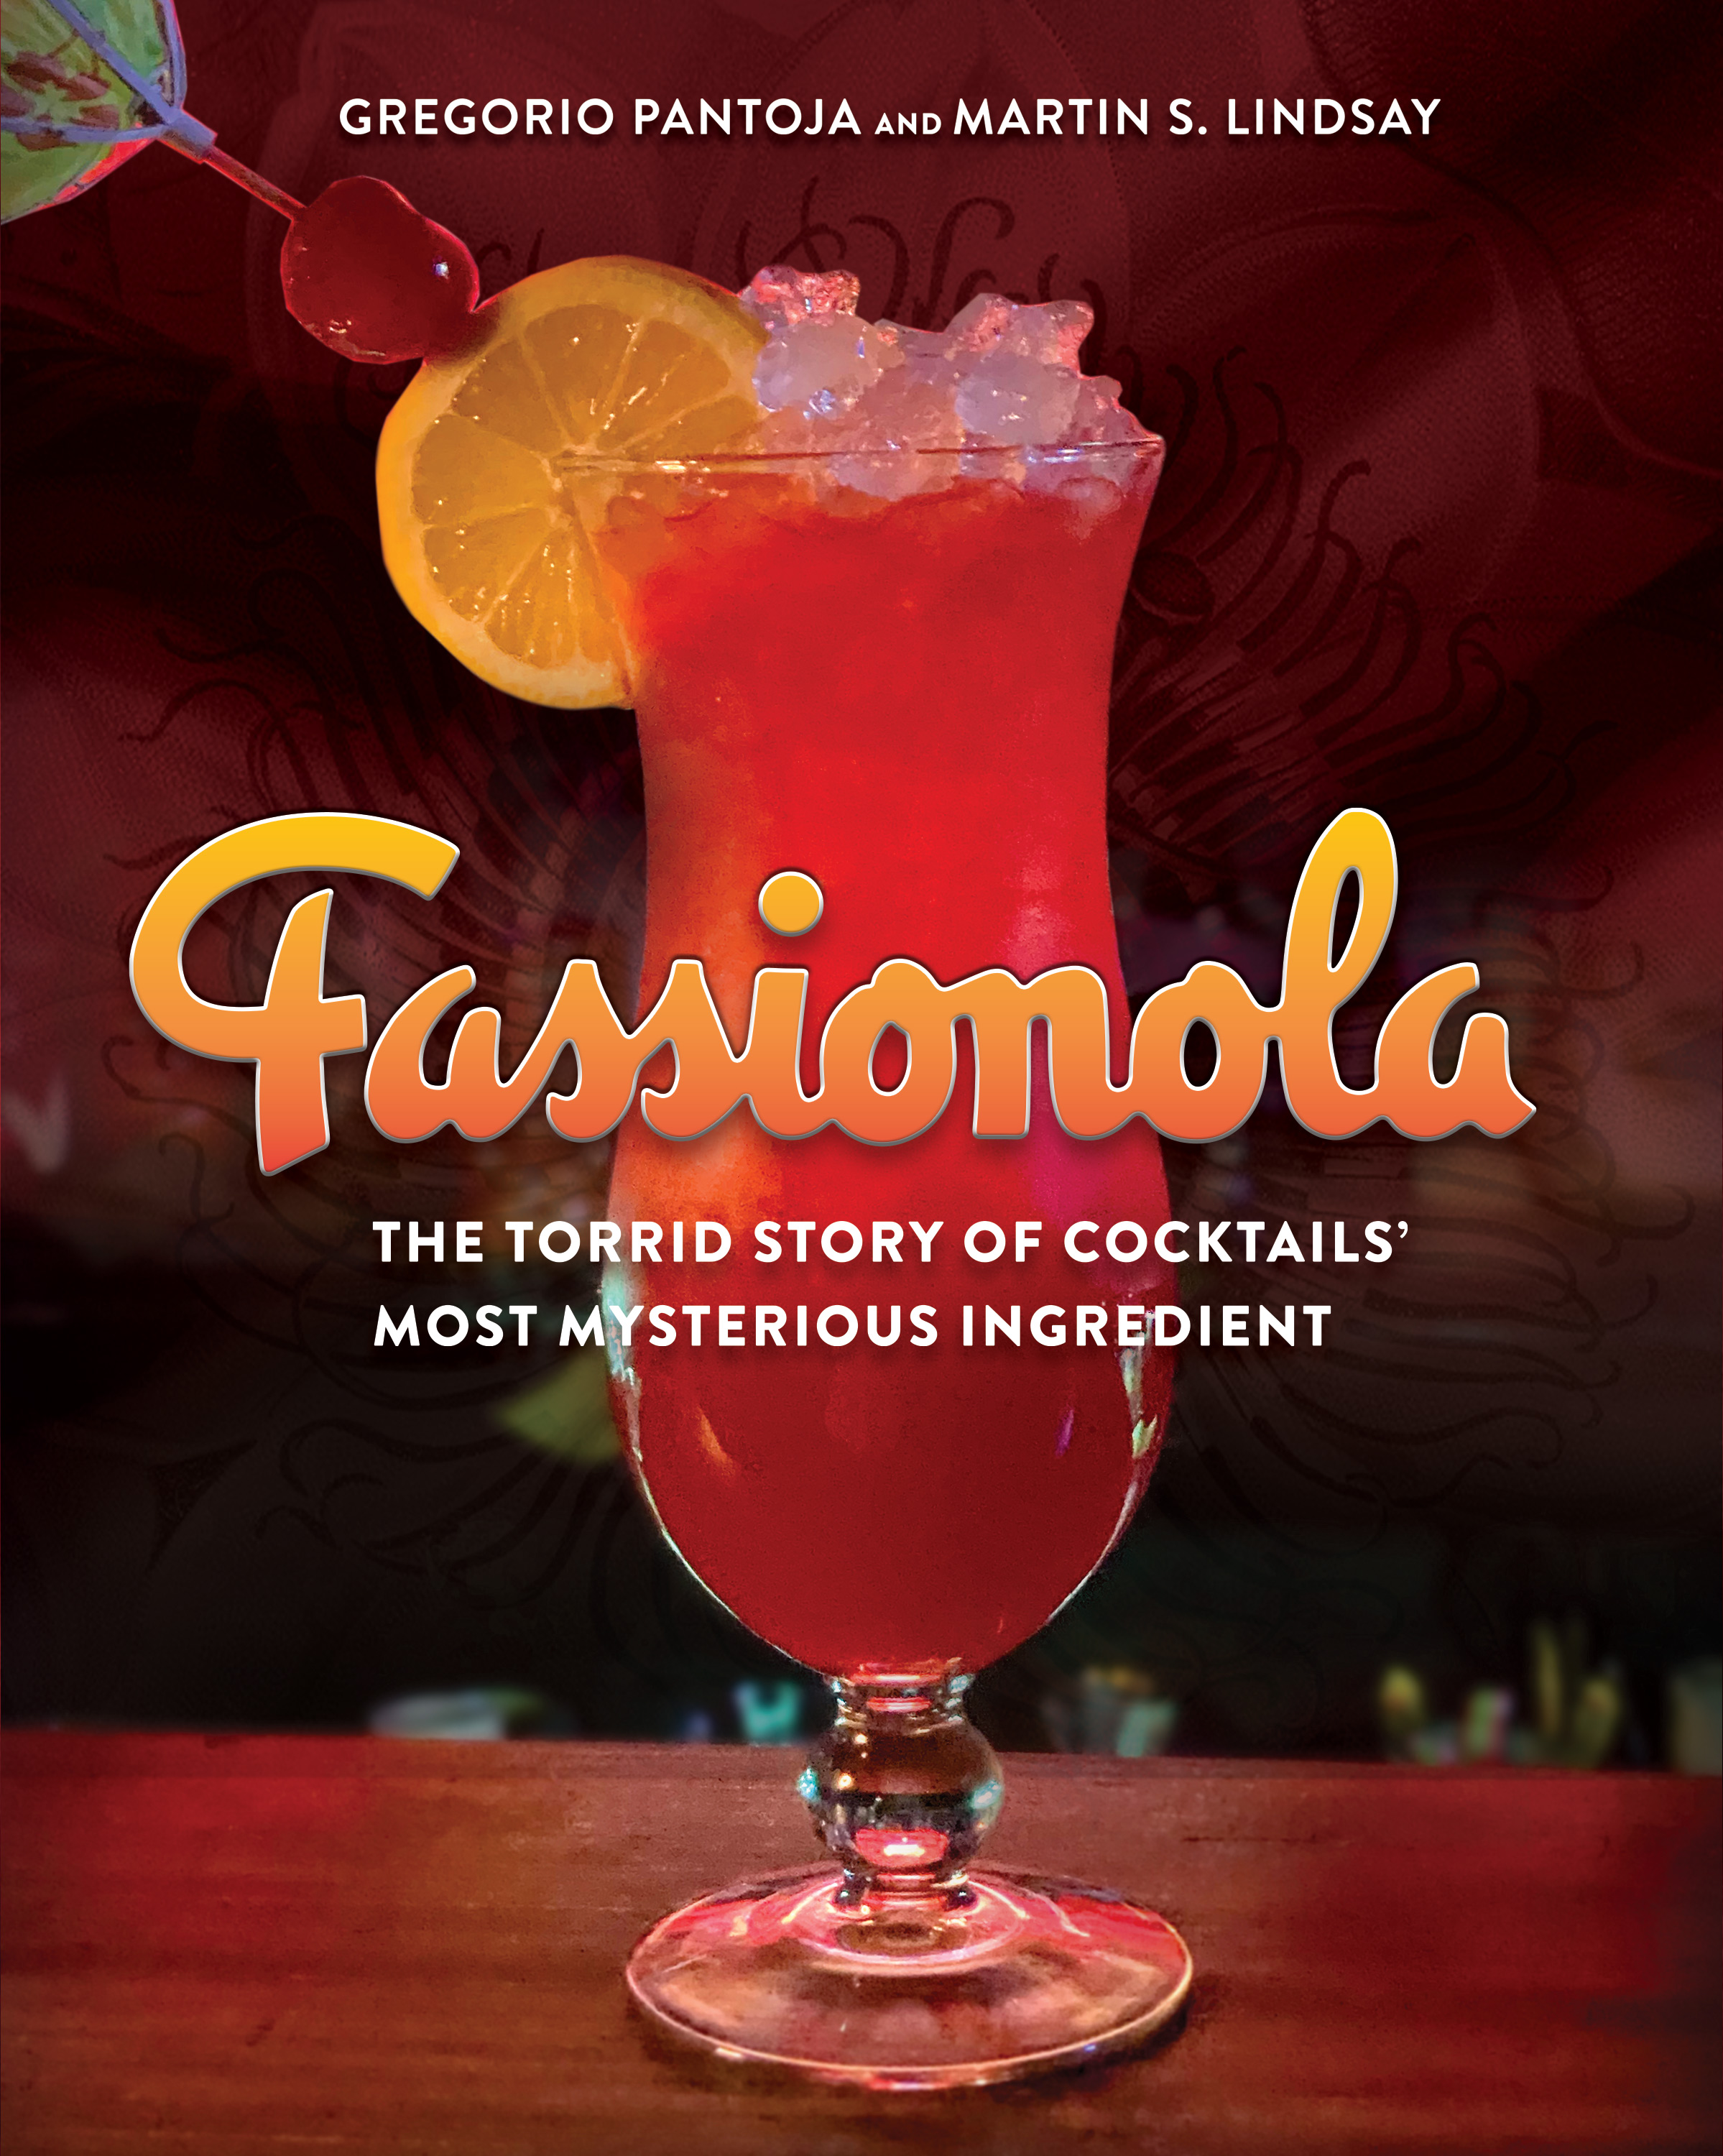 New Book, “Fassionola,” Reveals Lost History of Mysterious Cocktail Ingredient